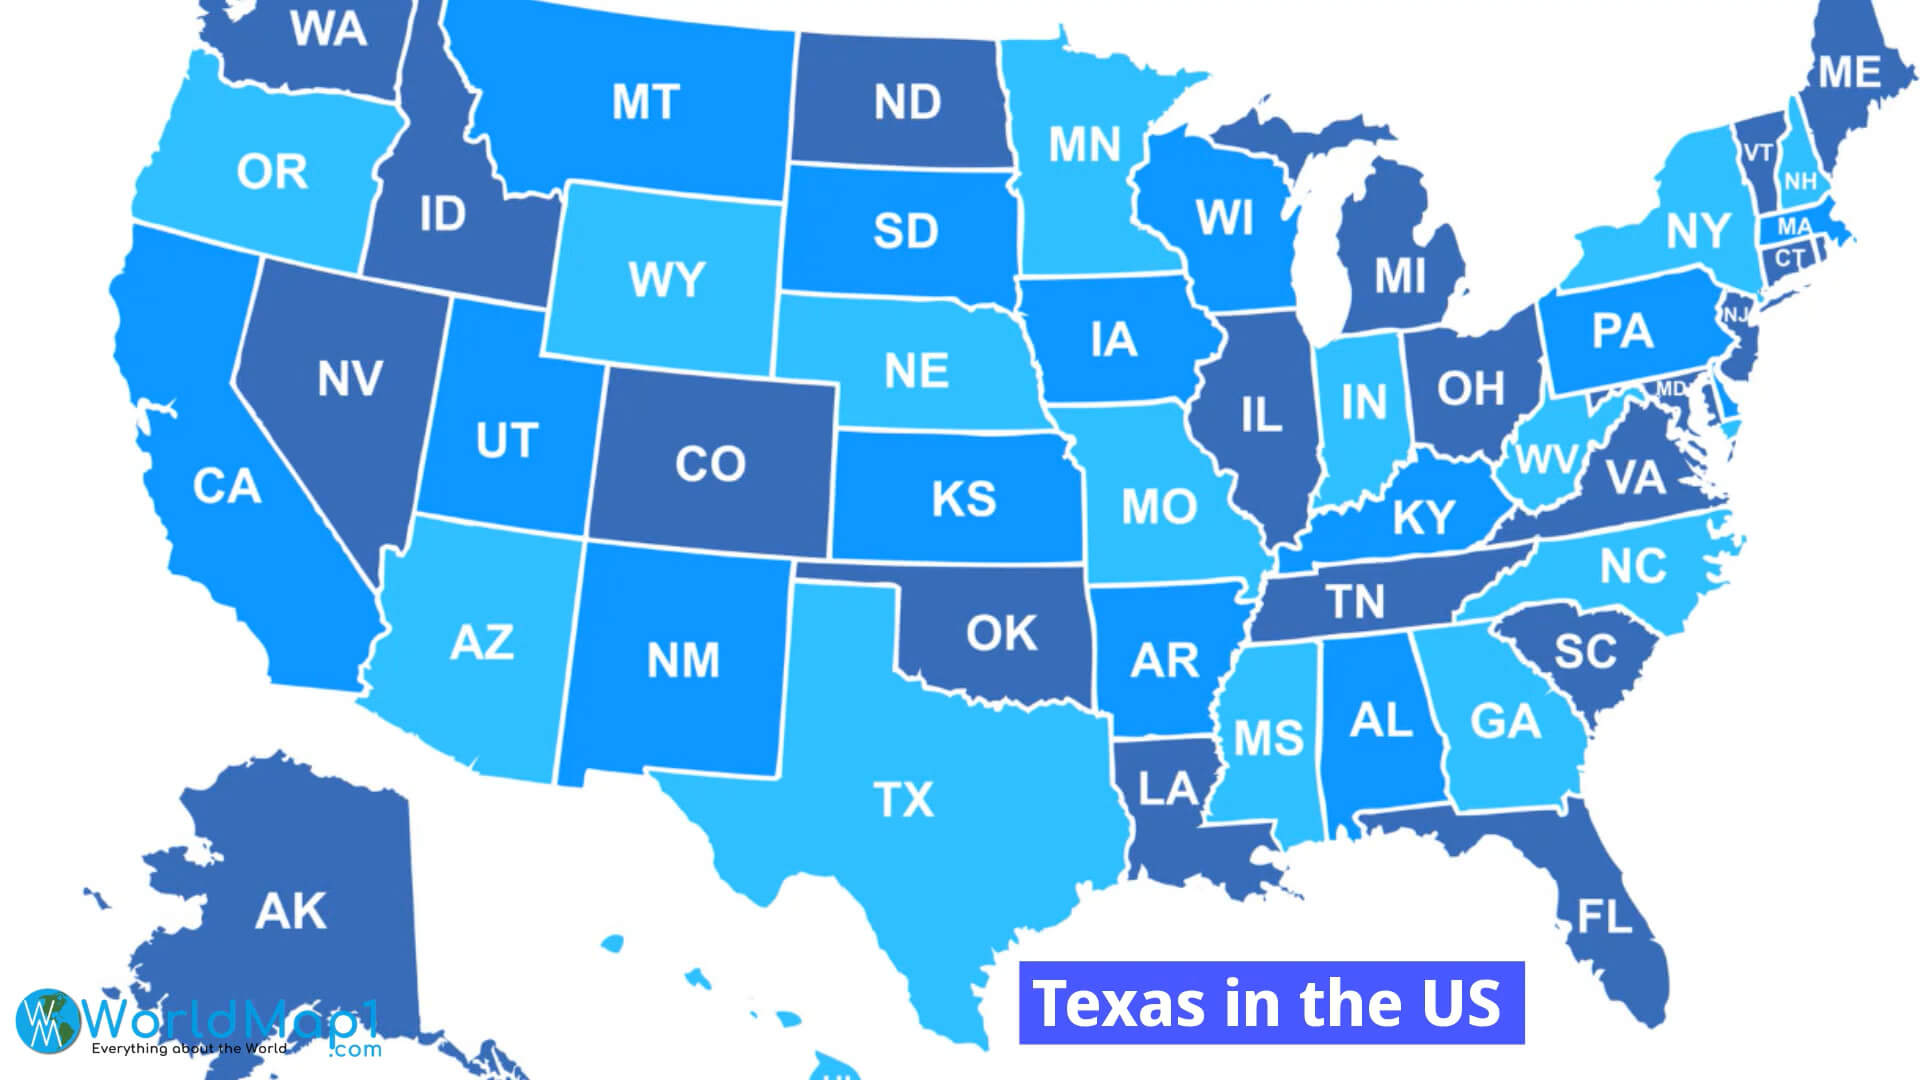 Where is Located Texas in the US